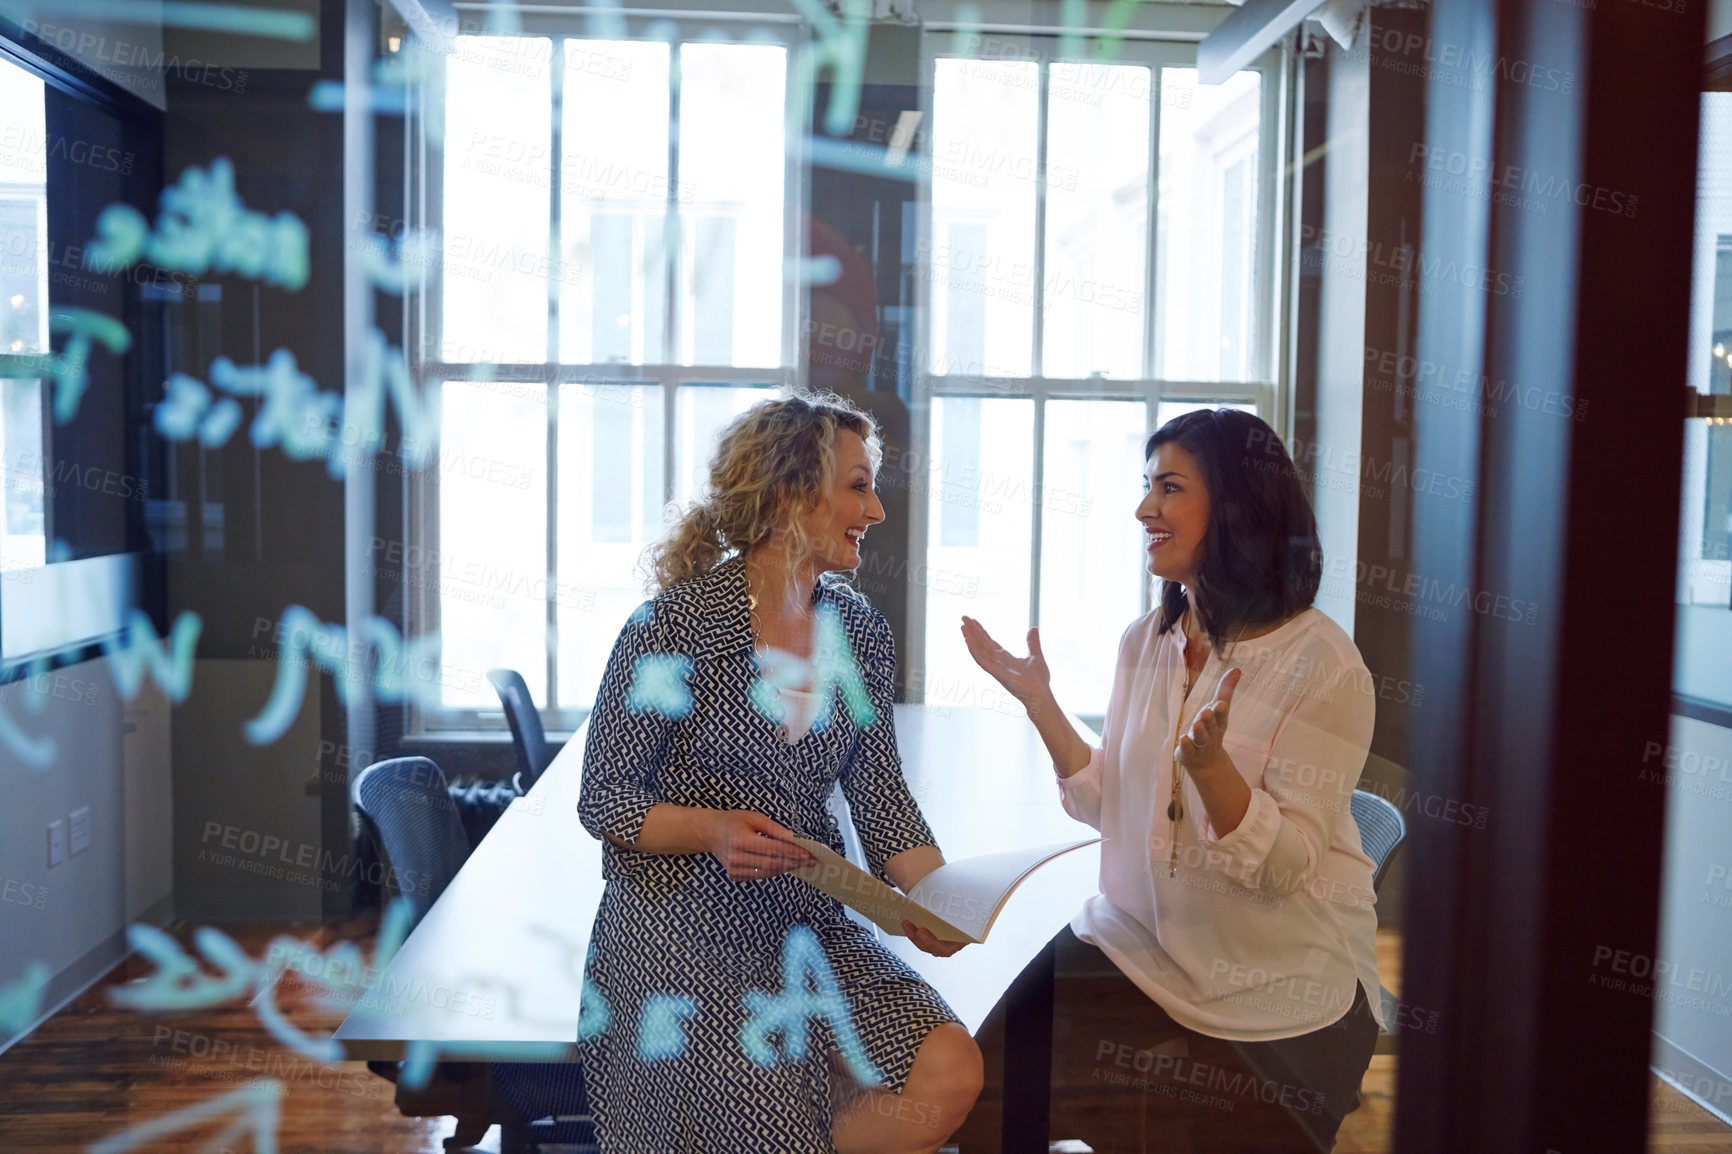 Buy stock photo Shot of two businesswoman brainstorming on a glass wall in an office